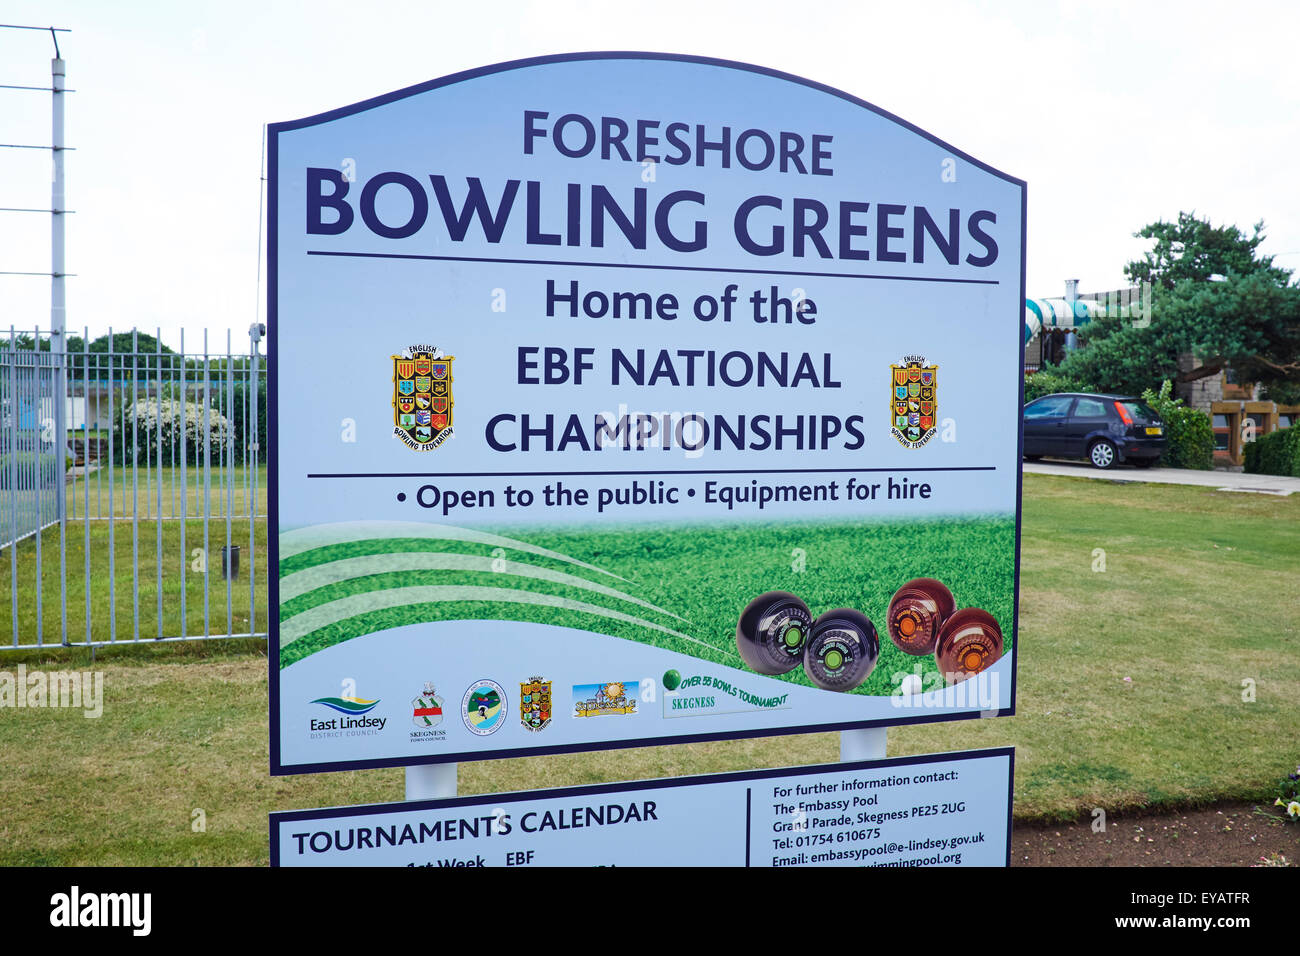 Foreshore Bowling Green Sign Home To The EBF National Championships North Parade Skegness Lincolnshire UK Stock Photo